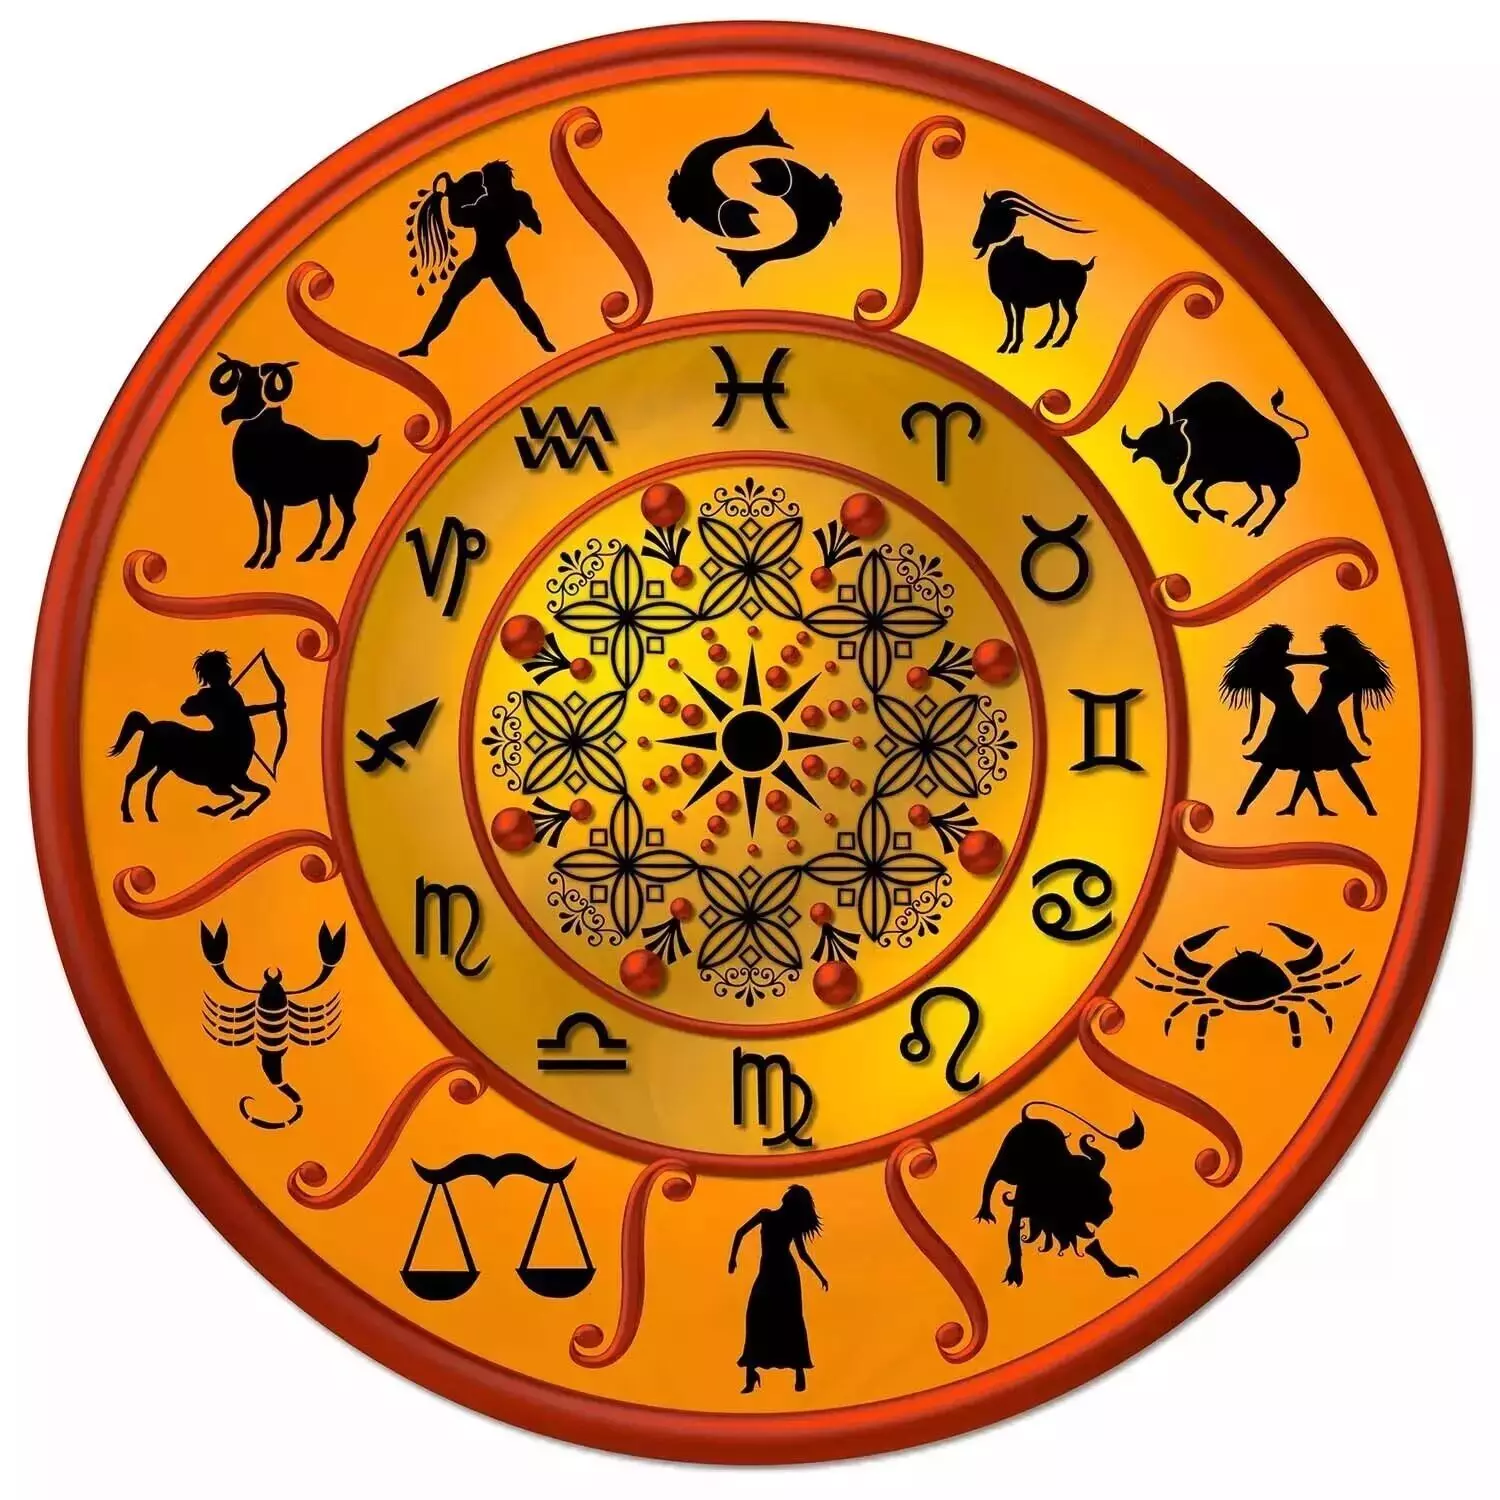 04 August  – Know your todays horoscope